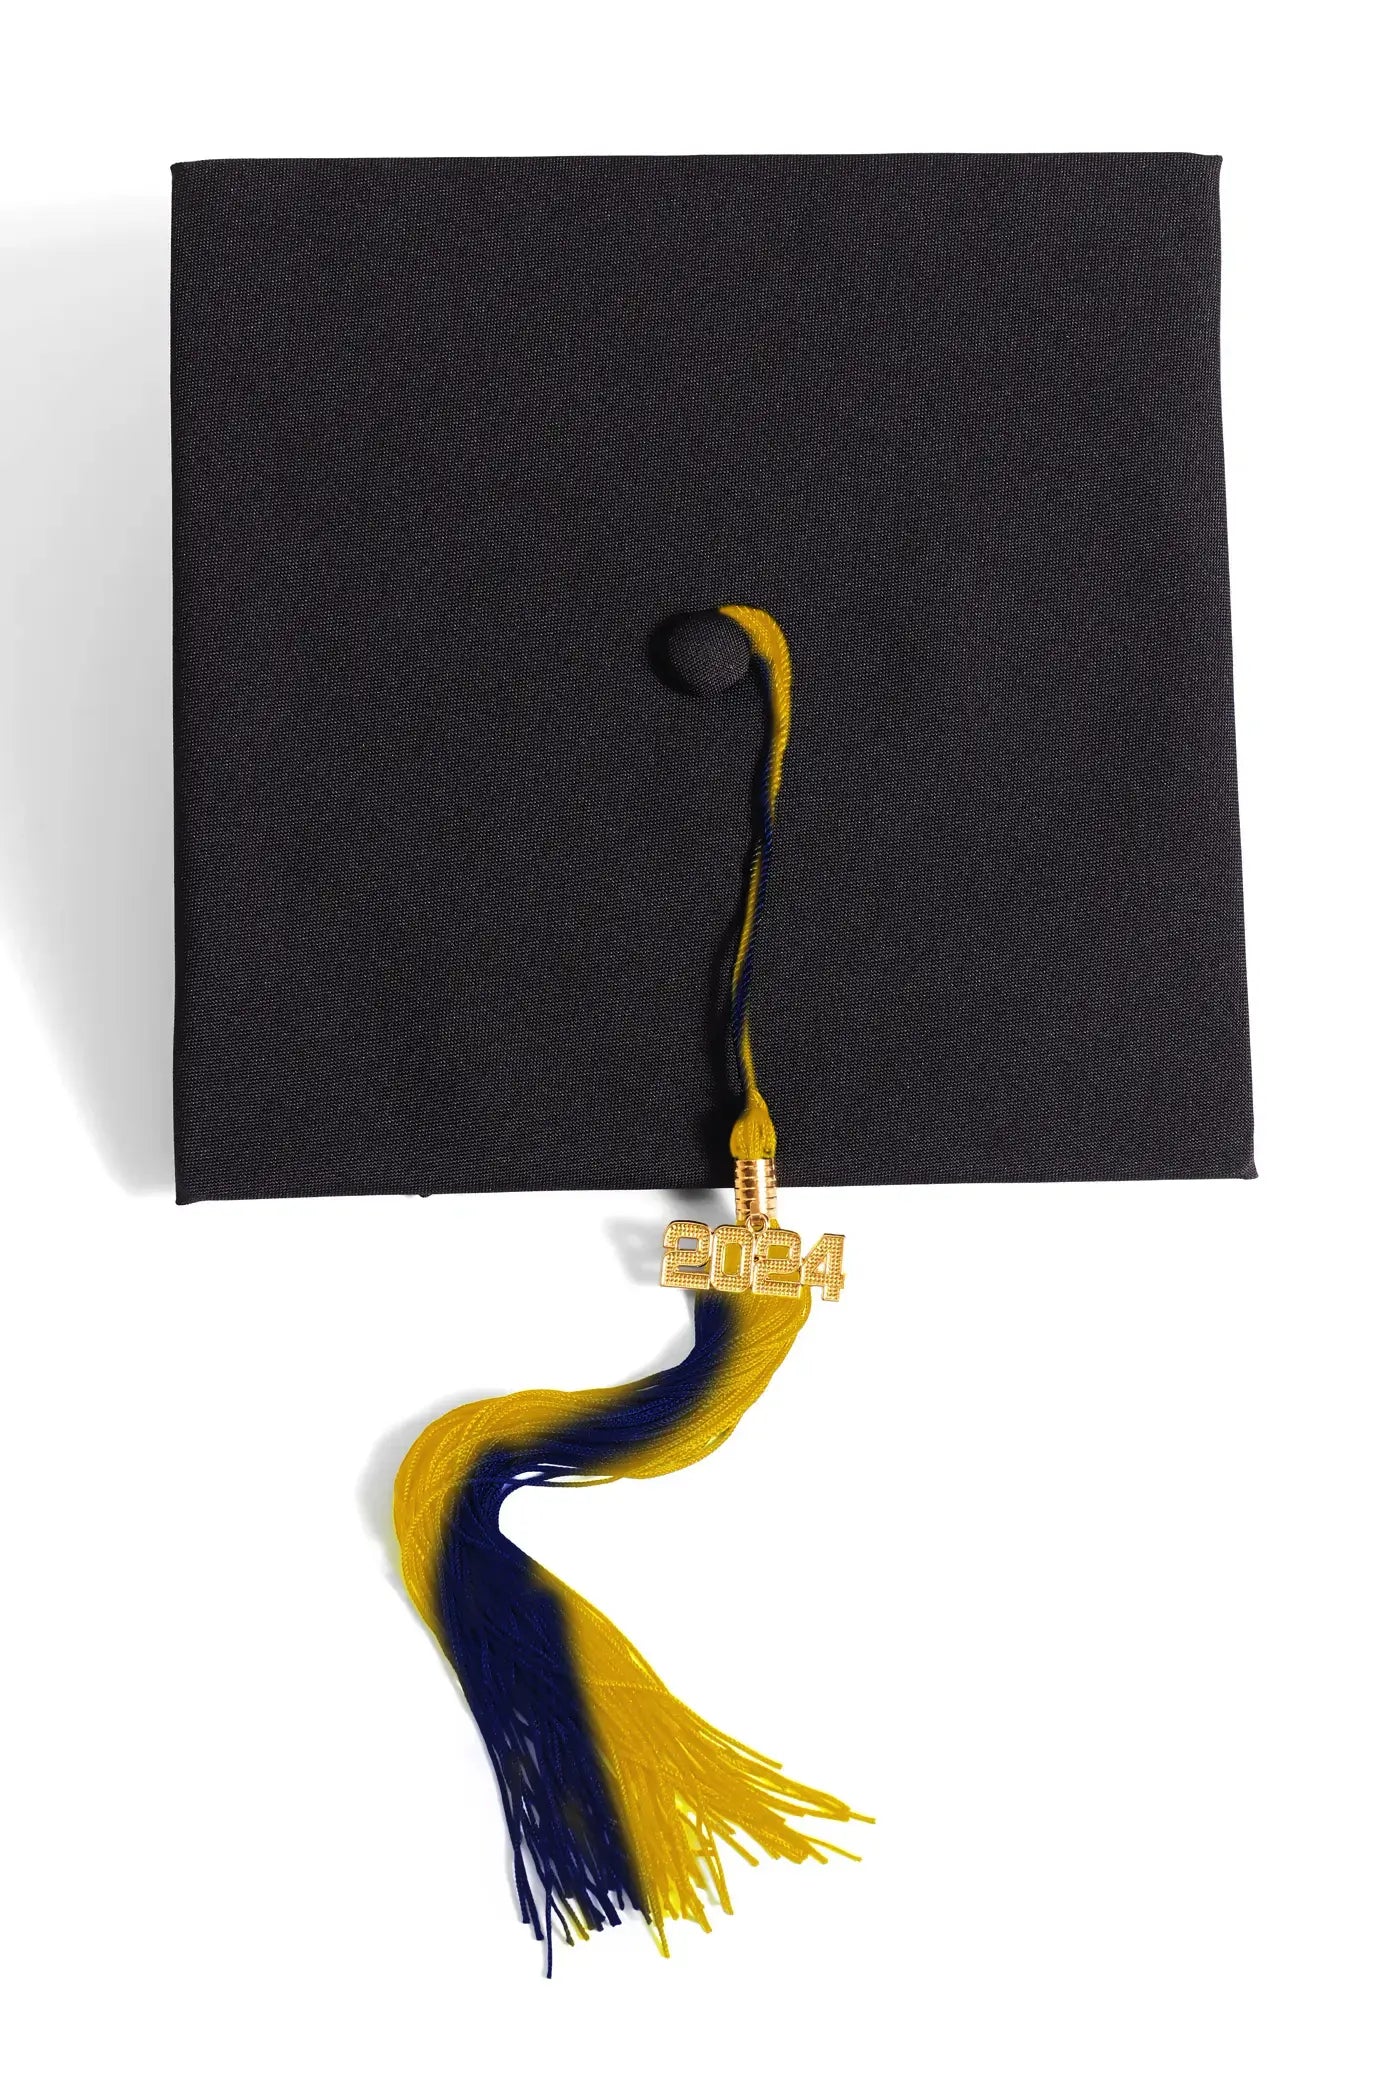 Bachelor's Degree Cap & Gown Set for UC Berkeley